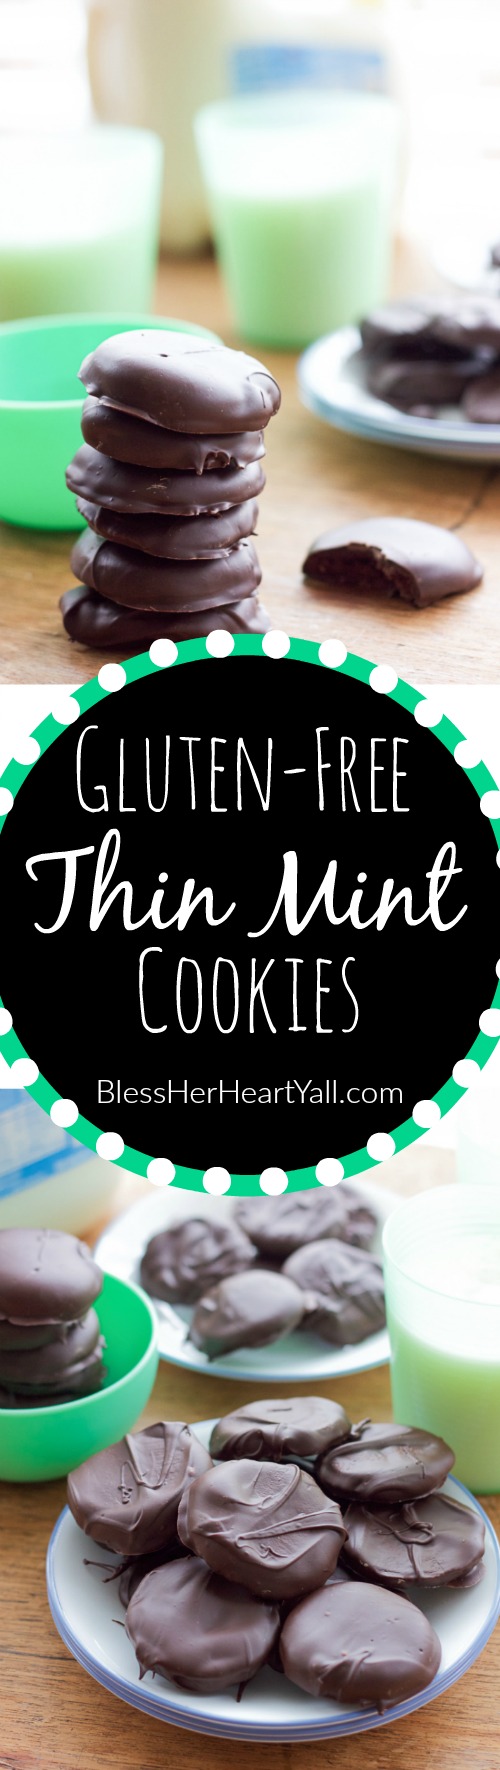 gluten-free thin mint cookies! These gluten-free thin mint cookies are the best gluten-free Girl Scout cookie copy cat recipe that it just may beat out the real thing! Get your Girl Scout cookie fix the homemade way with these crisp, minty, chocolate favorites!